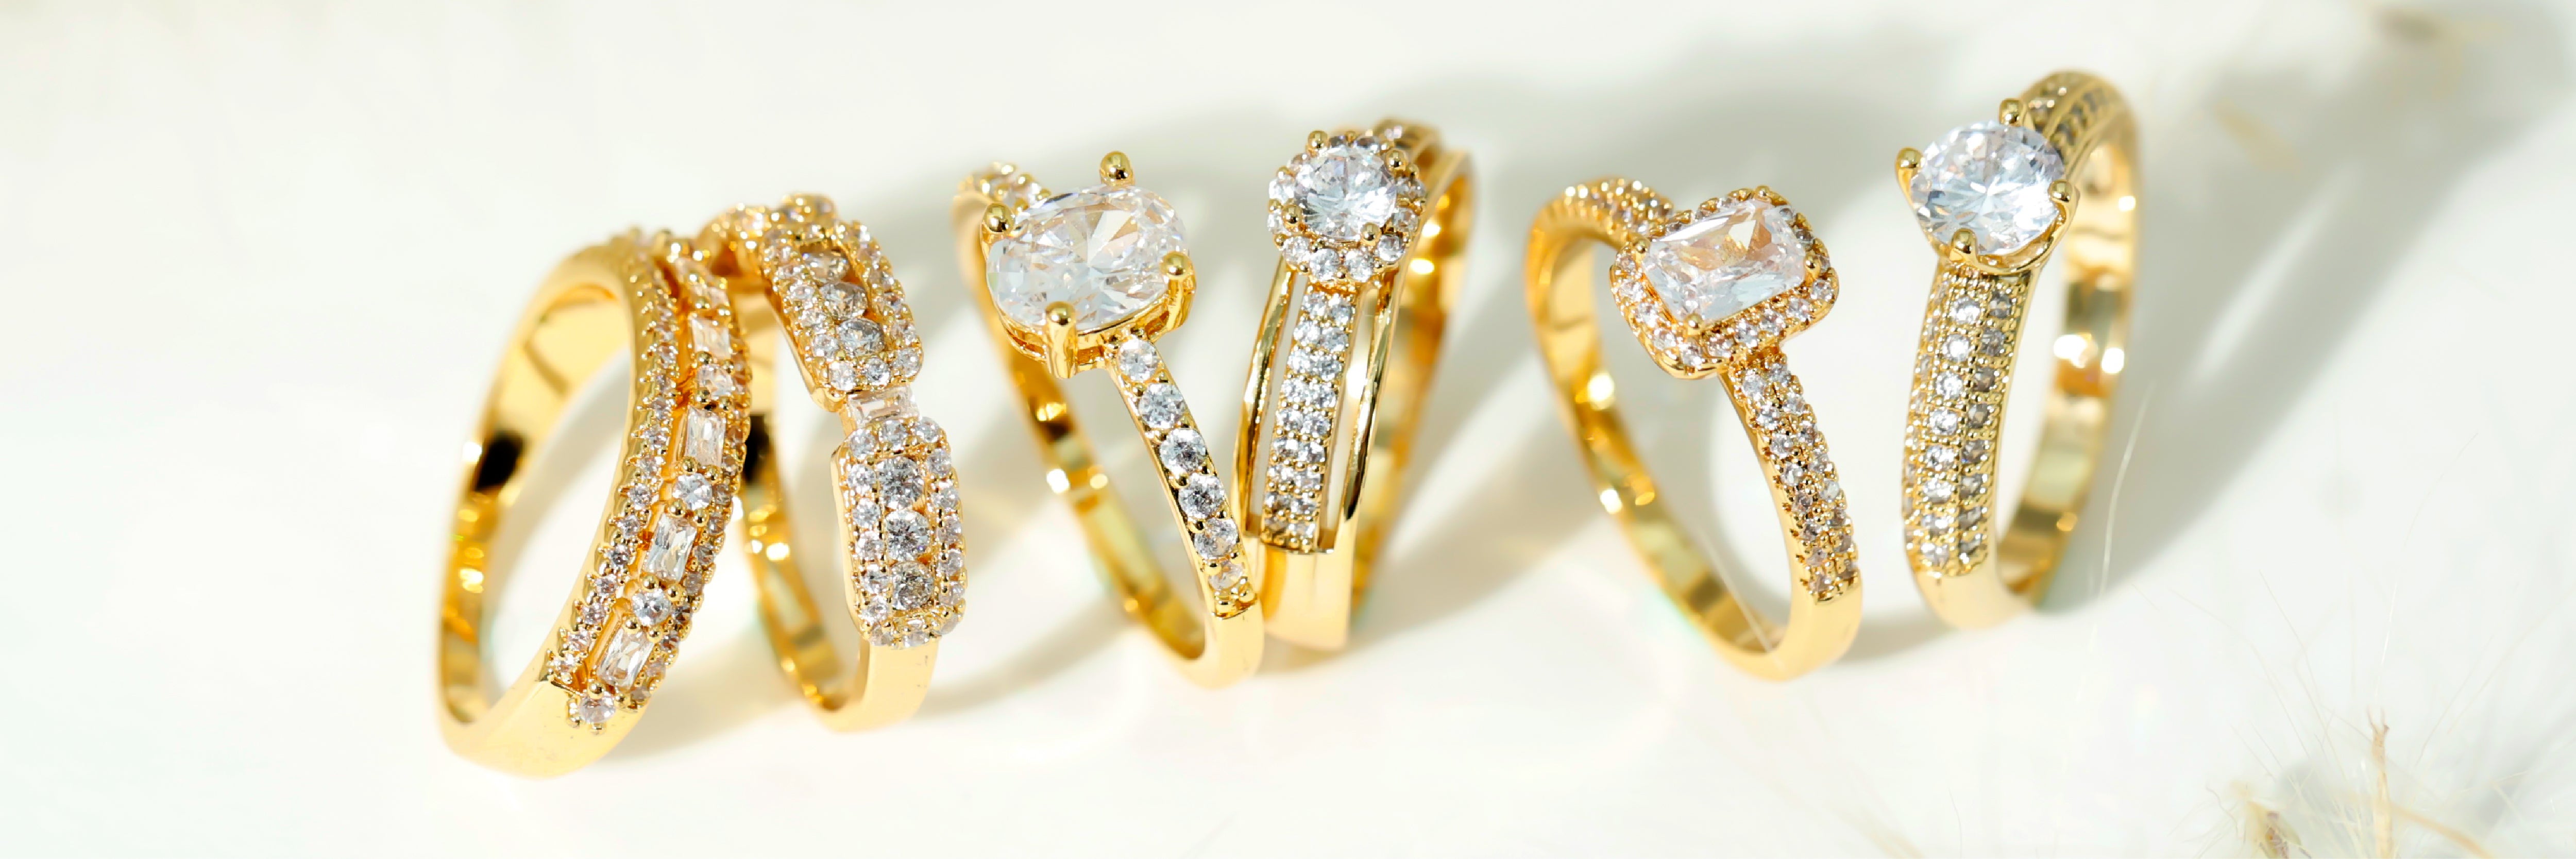 Hottest Jewelry Trends to Follow